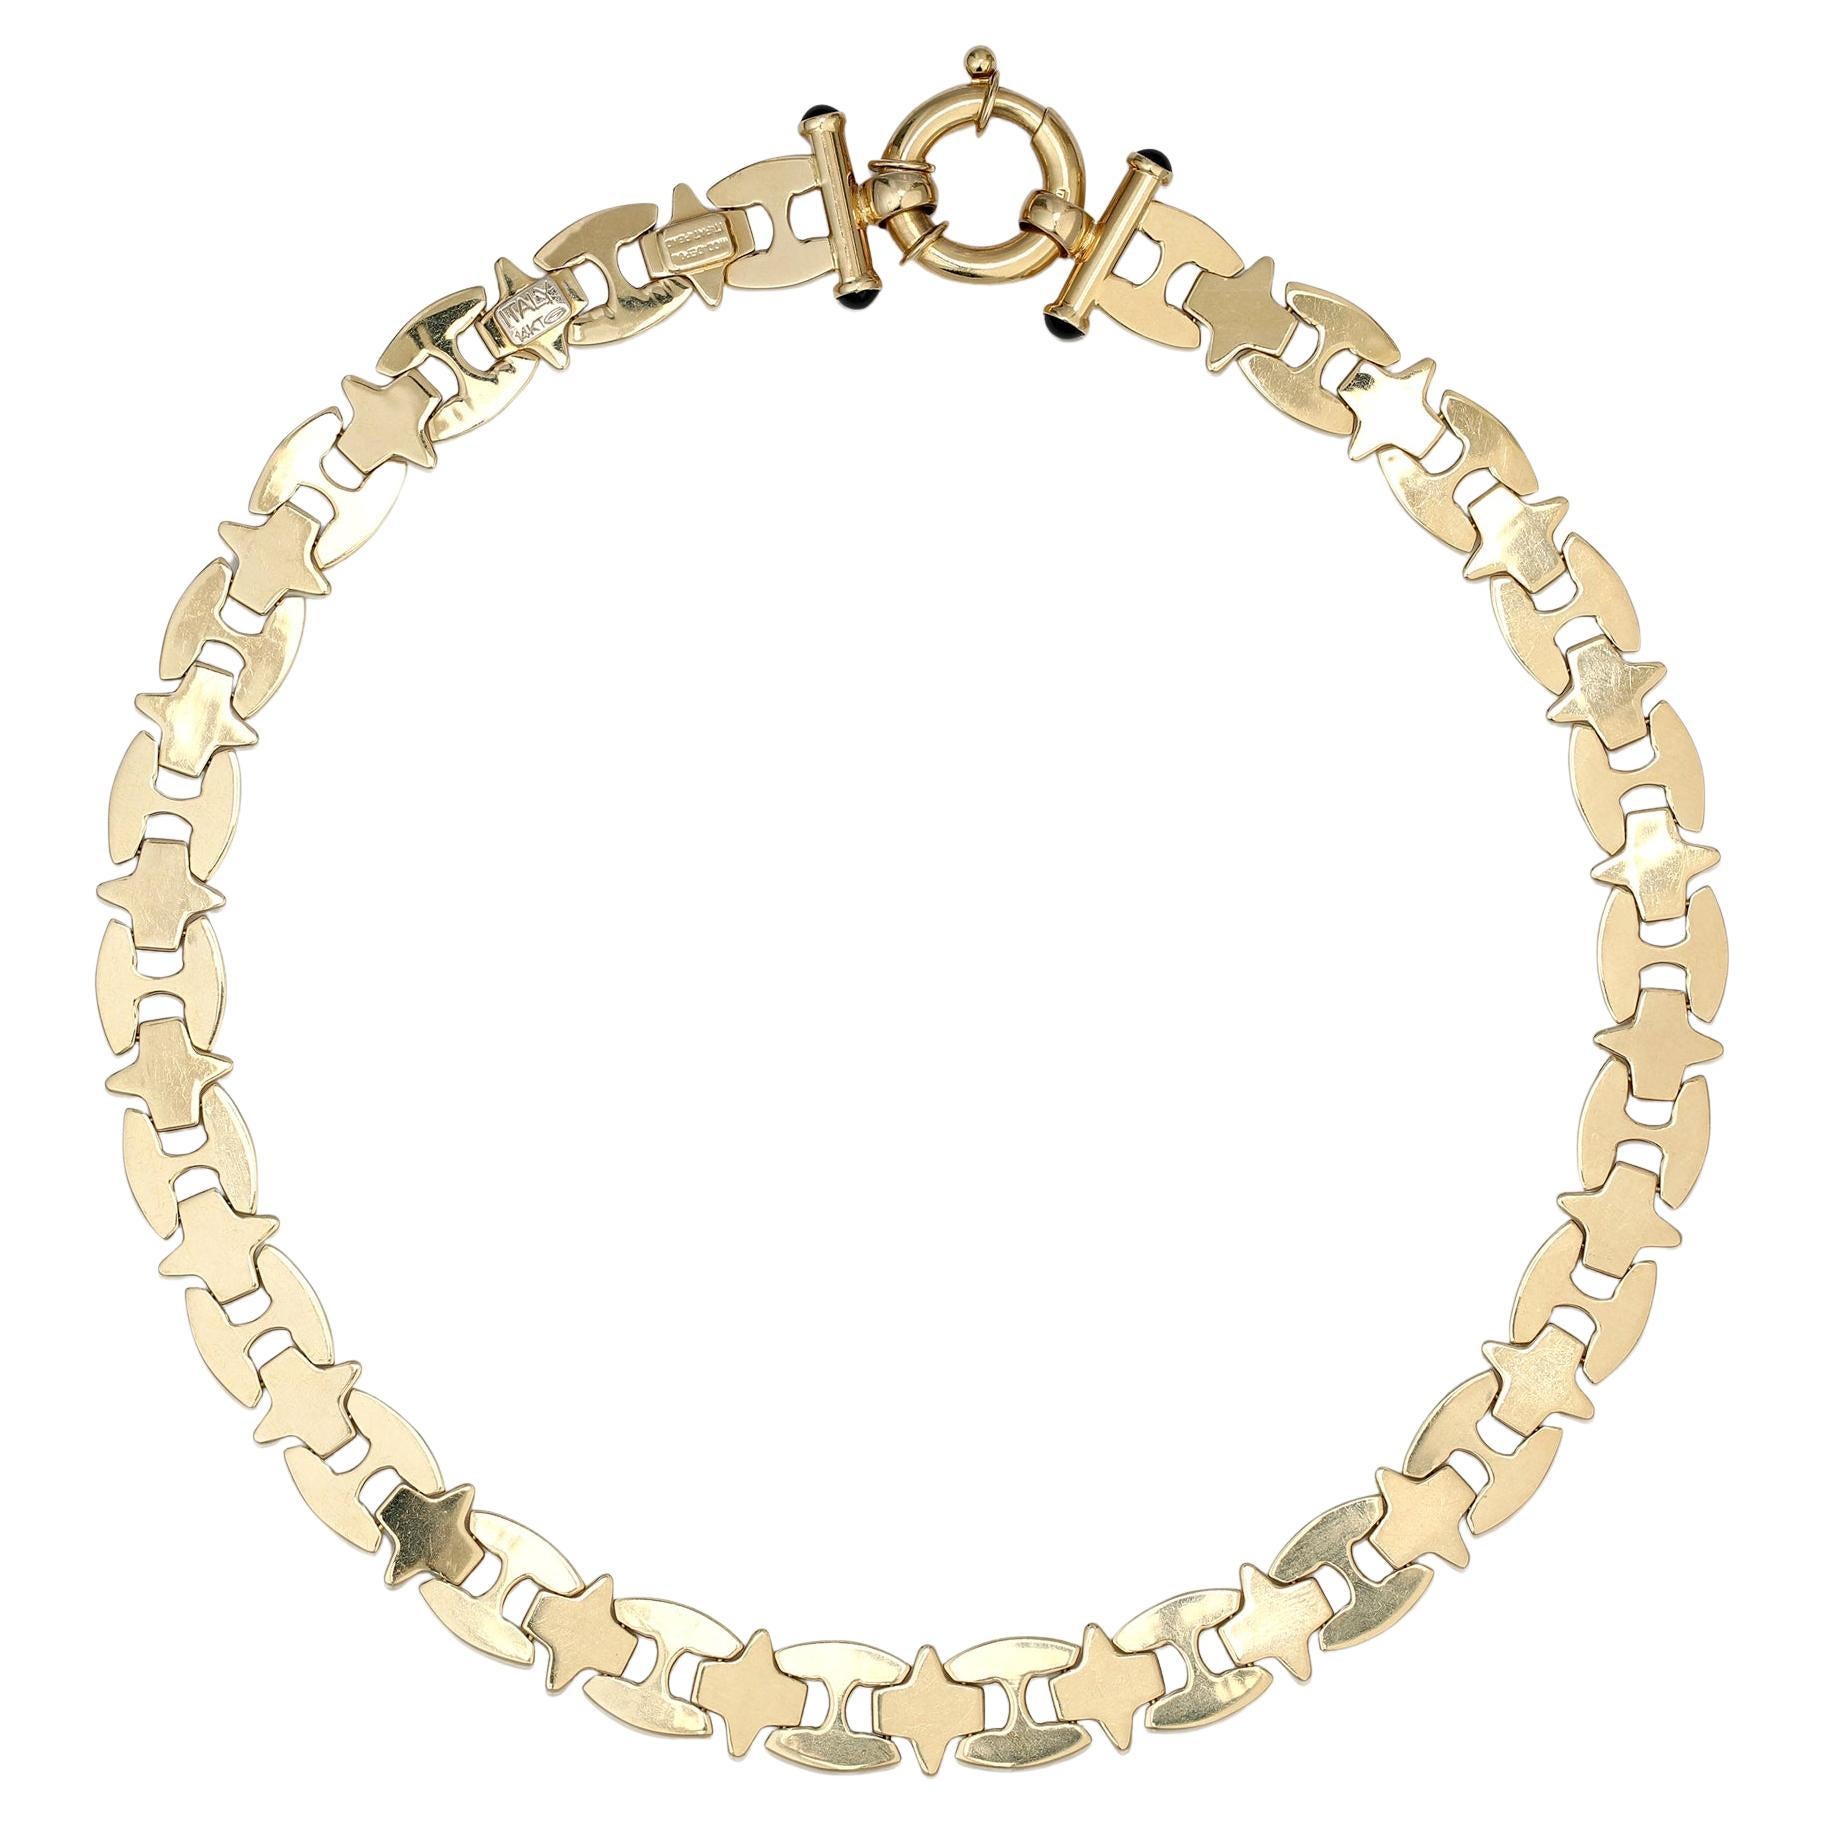 A superb and sexy gold collar necklace for making a great – and unforgettable – first impression! The neck-hugging 42cm anchor chain is crafted in gleaming 14ct yellow gold with alternating smooth and brushed-finished links. Two onyx cabochons sit